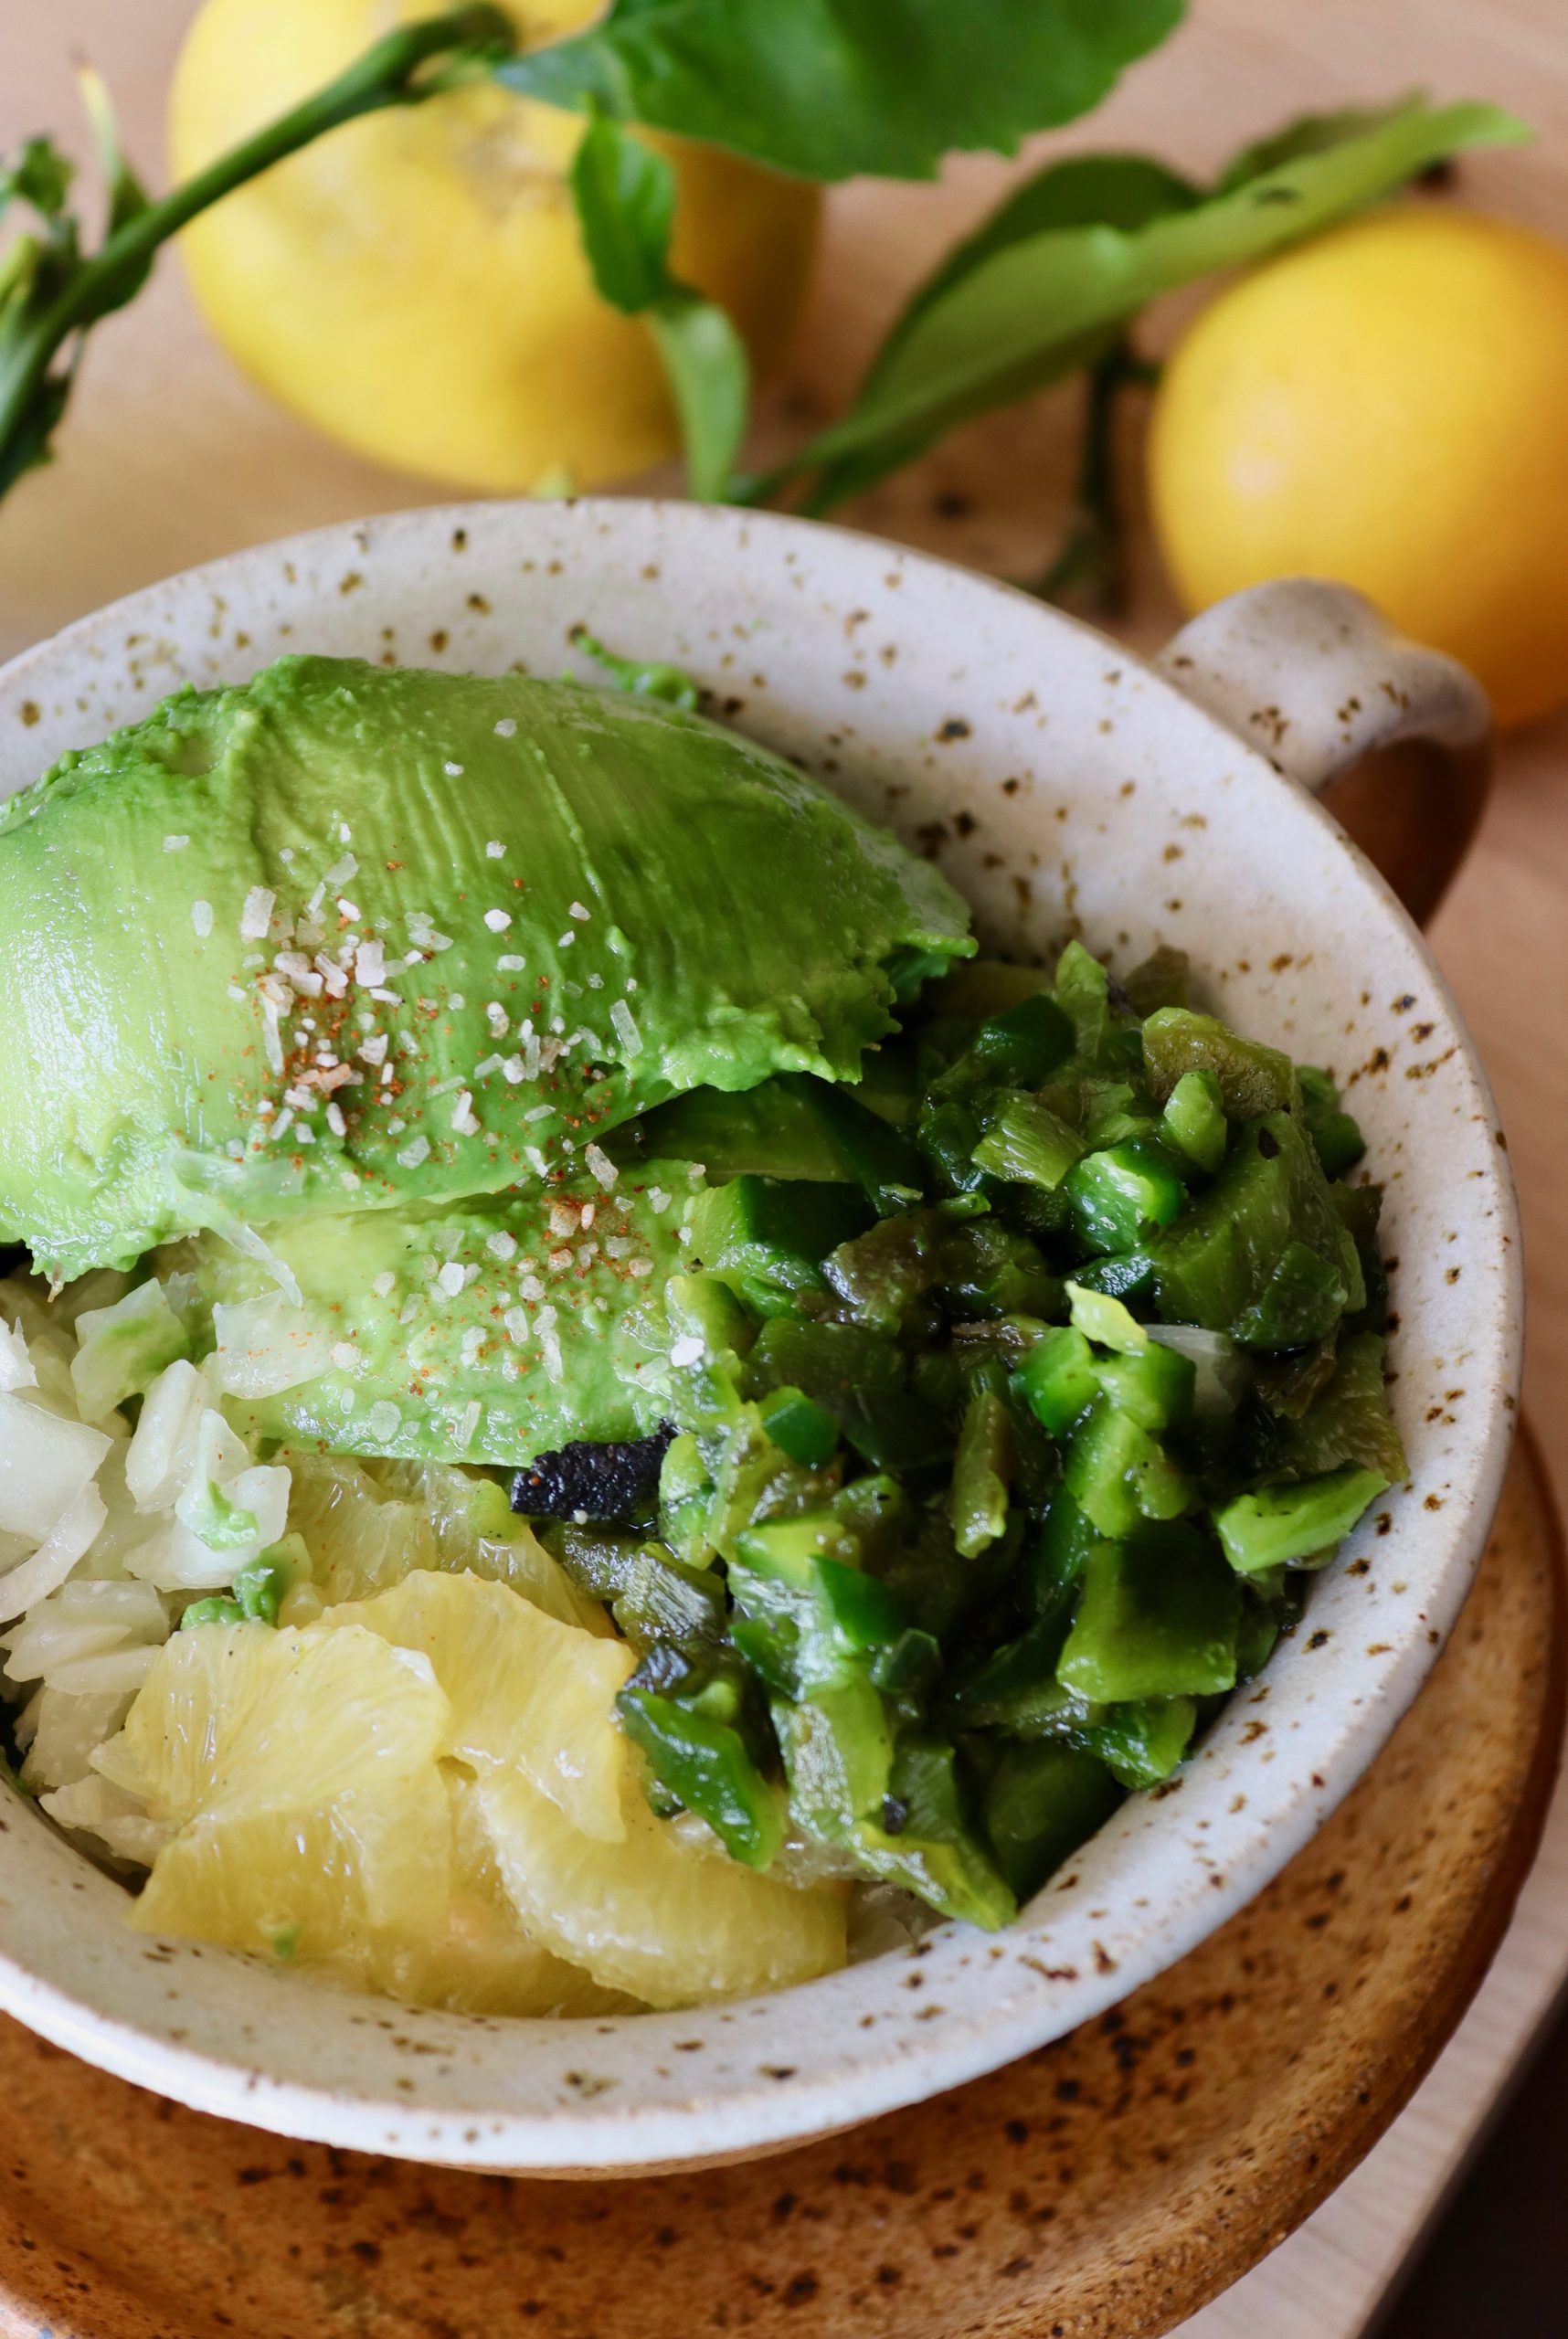 Ceramic speckled bowl filled with large pieces of avocado, lemon segments and chopped onion and green peppers.